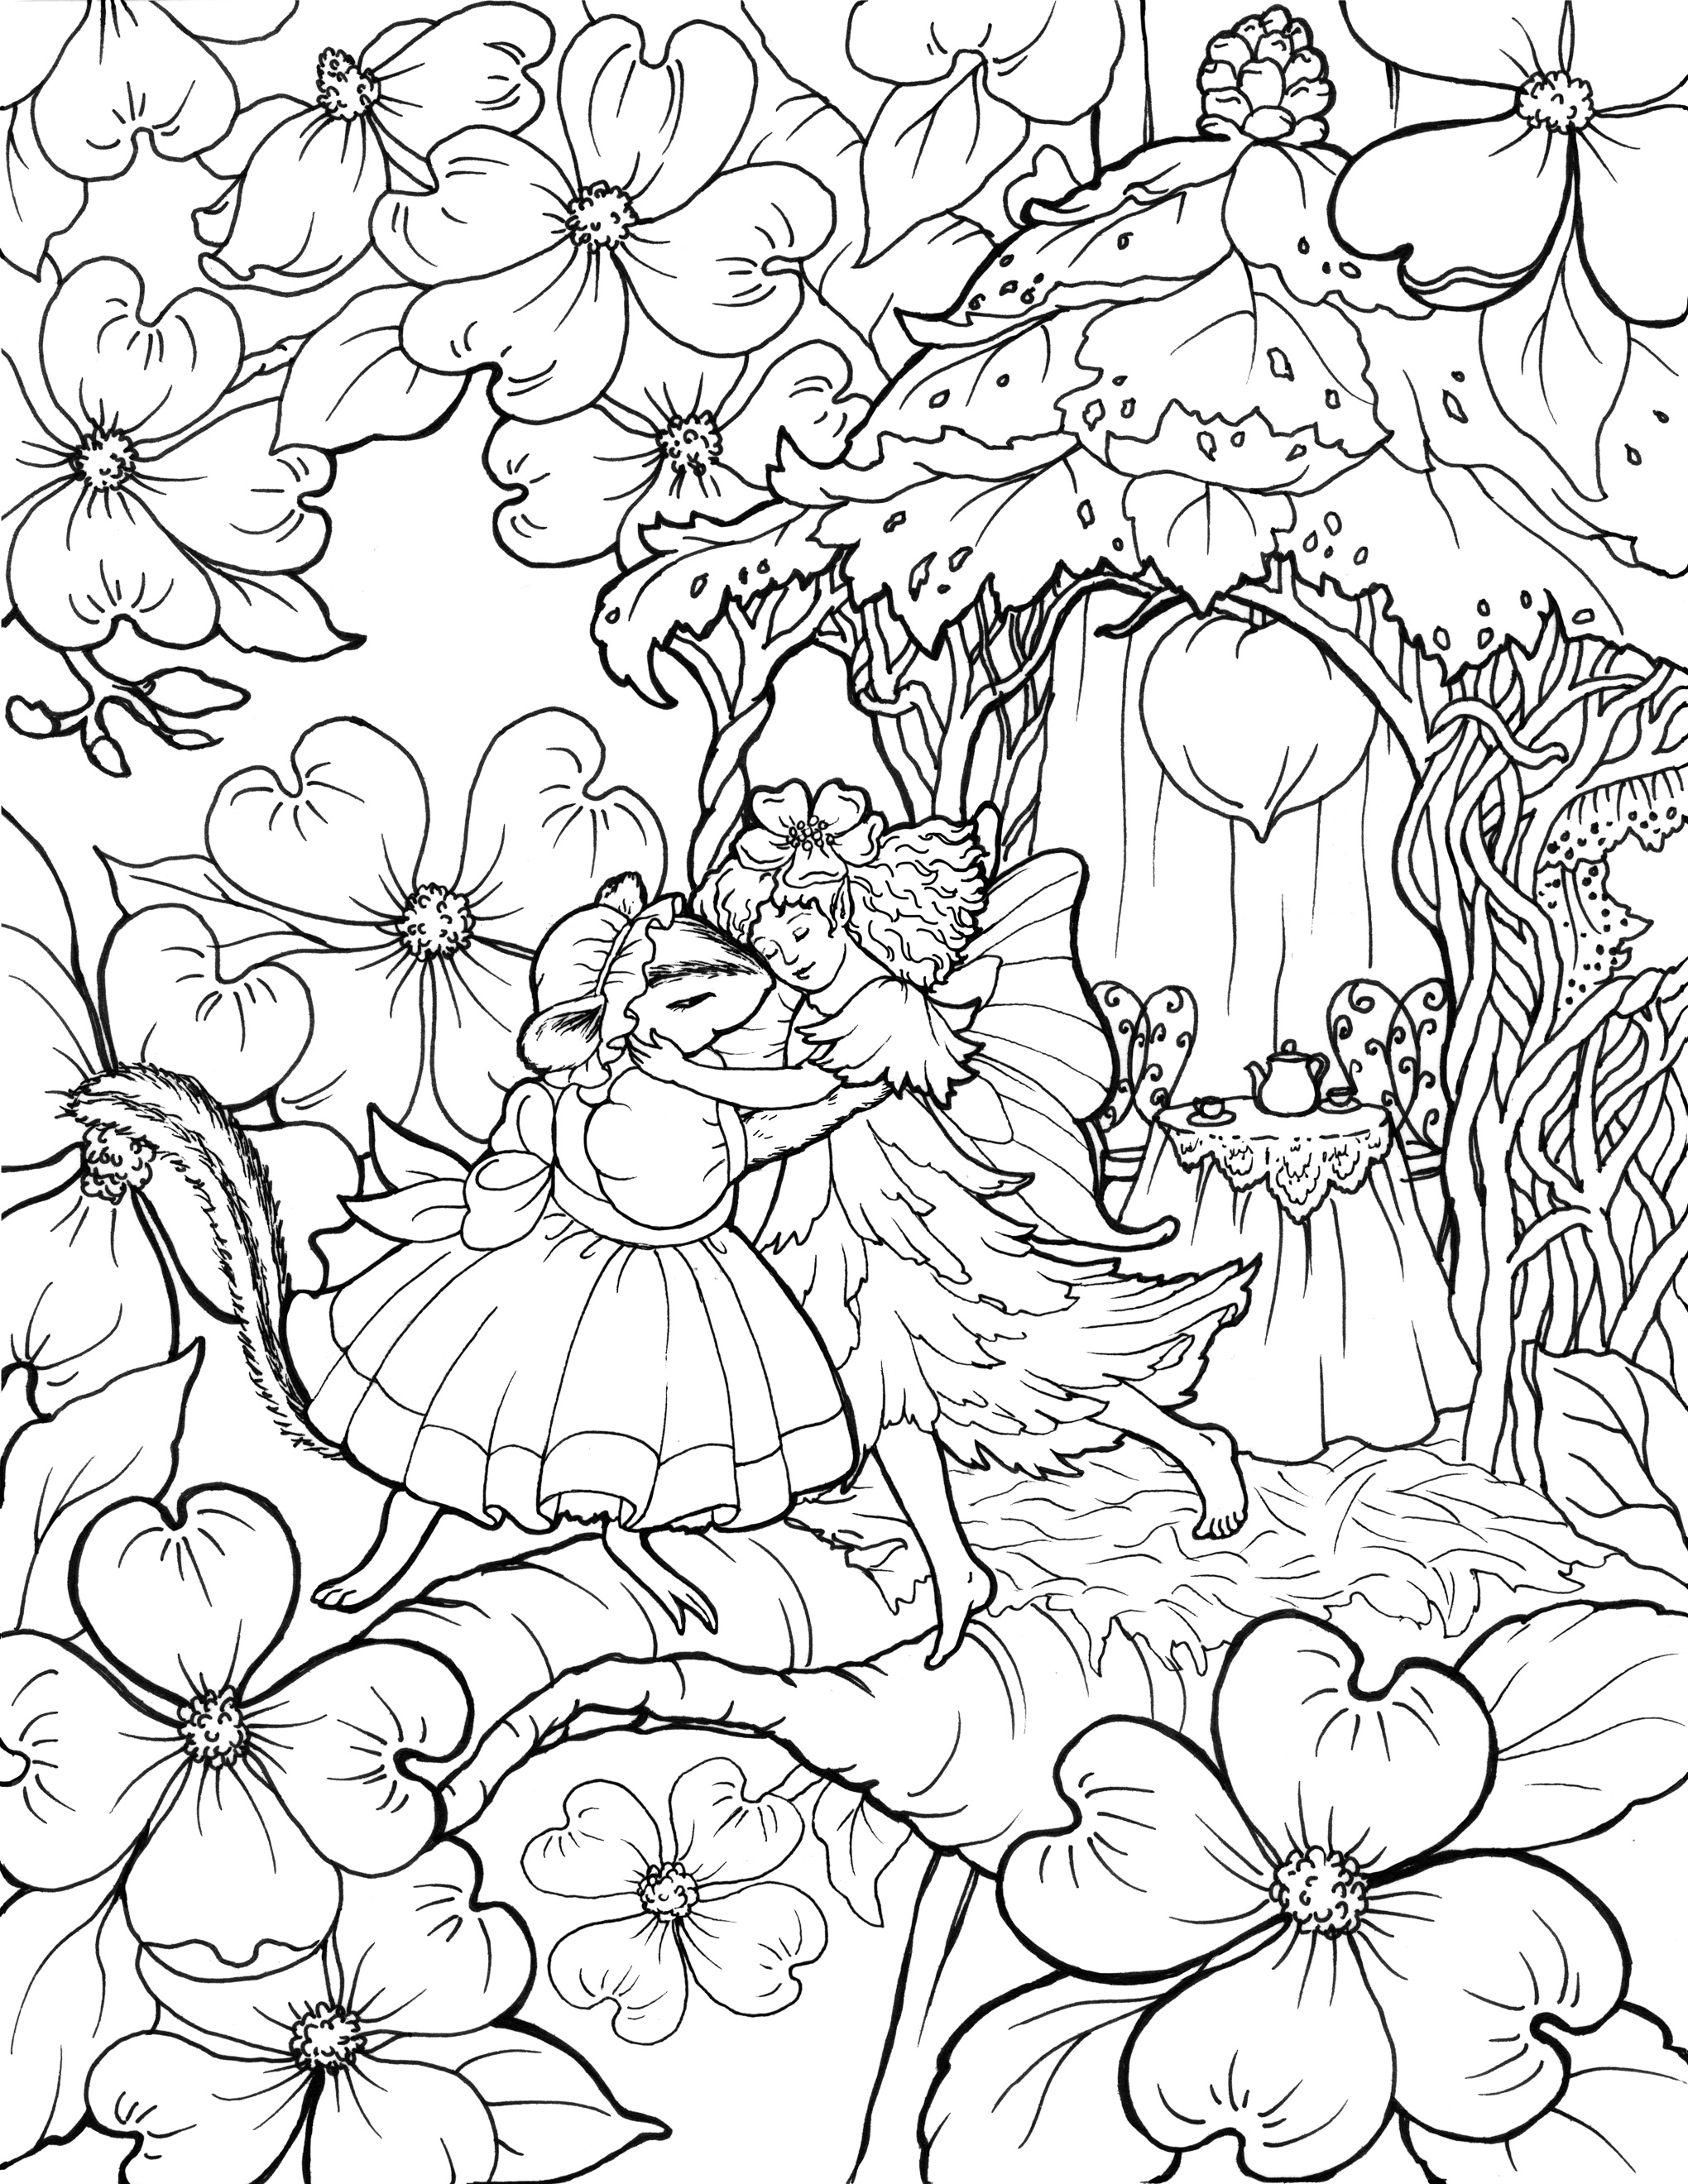 buy-grimm-fairy-tales-adult-coloring-book-grimm-fairy-tale-coloring